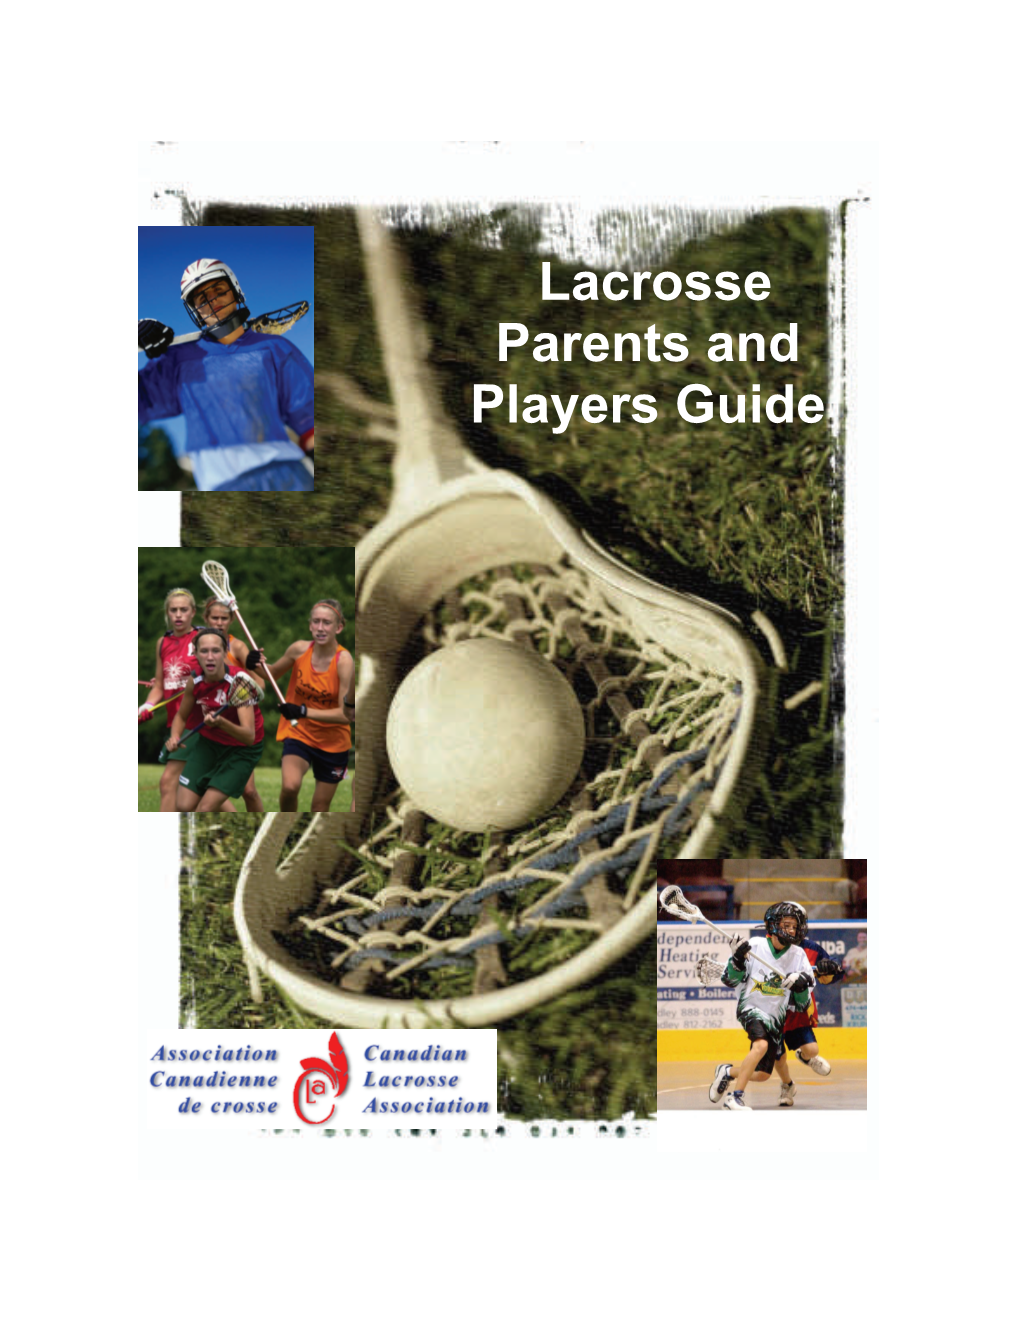 Lacrosse Parents and Players Guide Contents